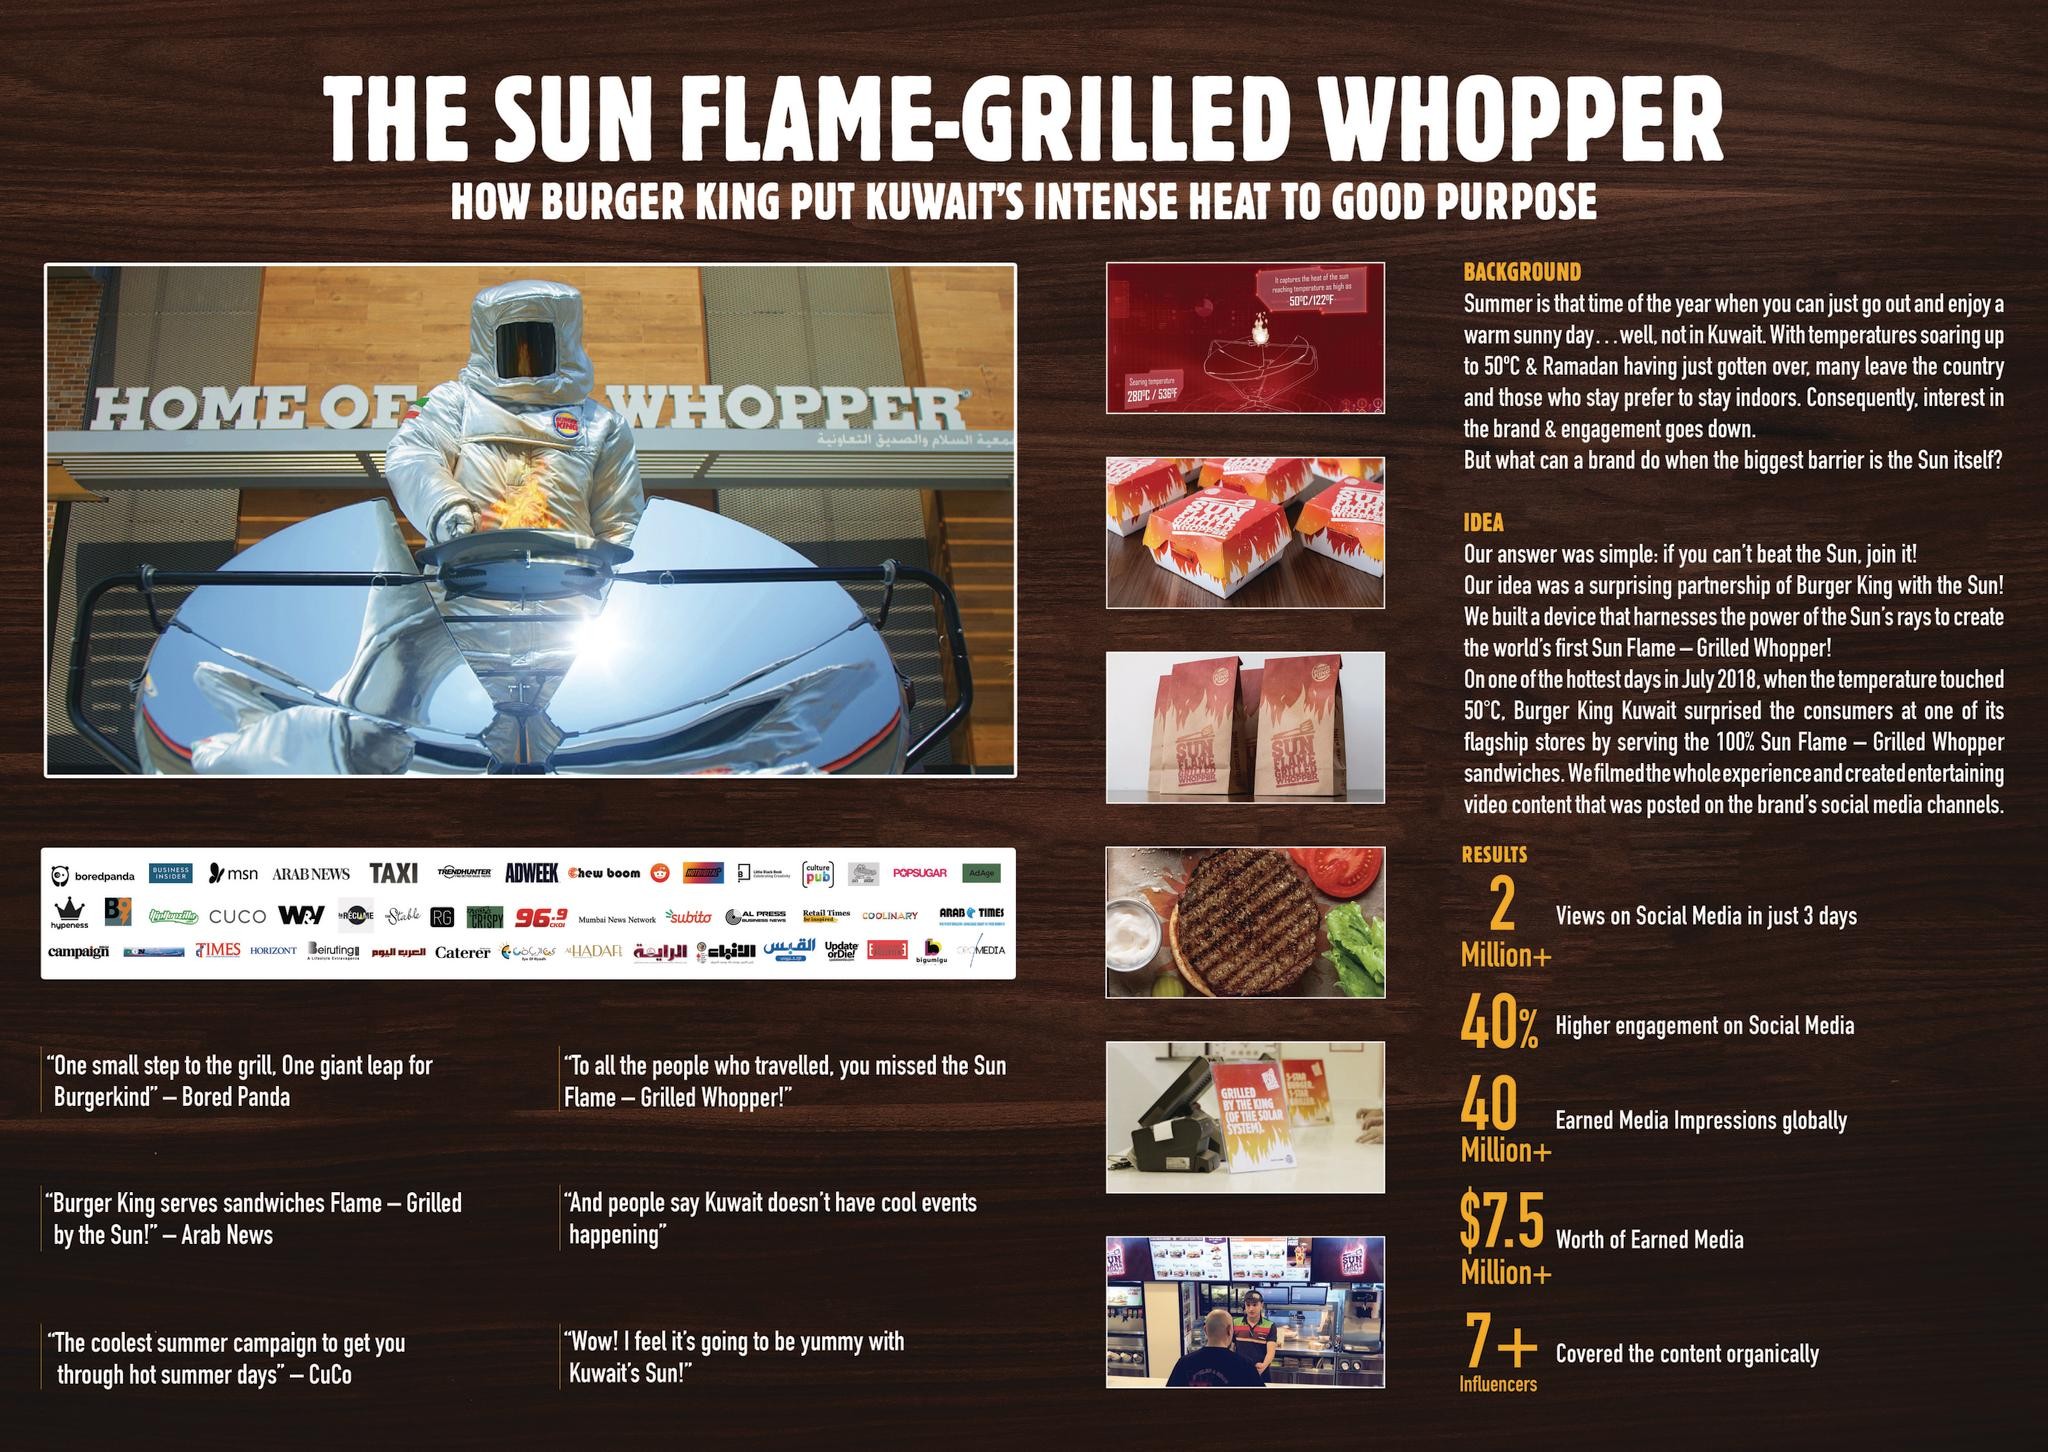 The Sun Flame Grilled Whopper